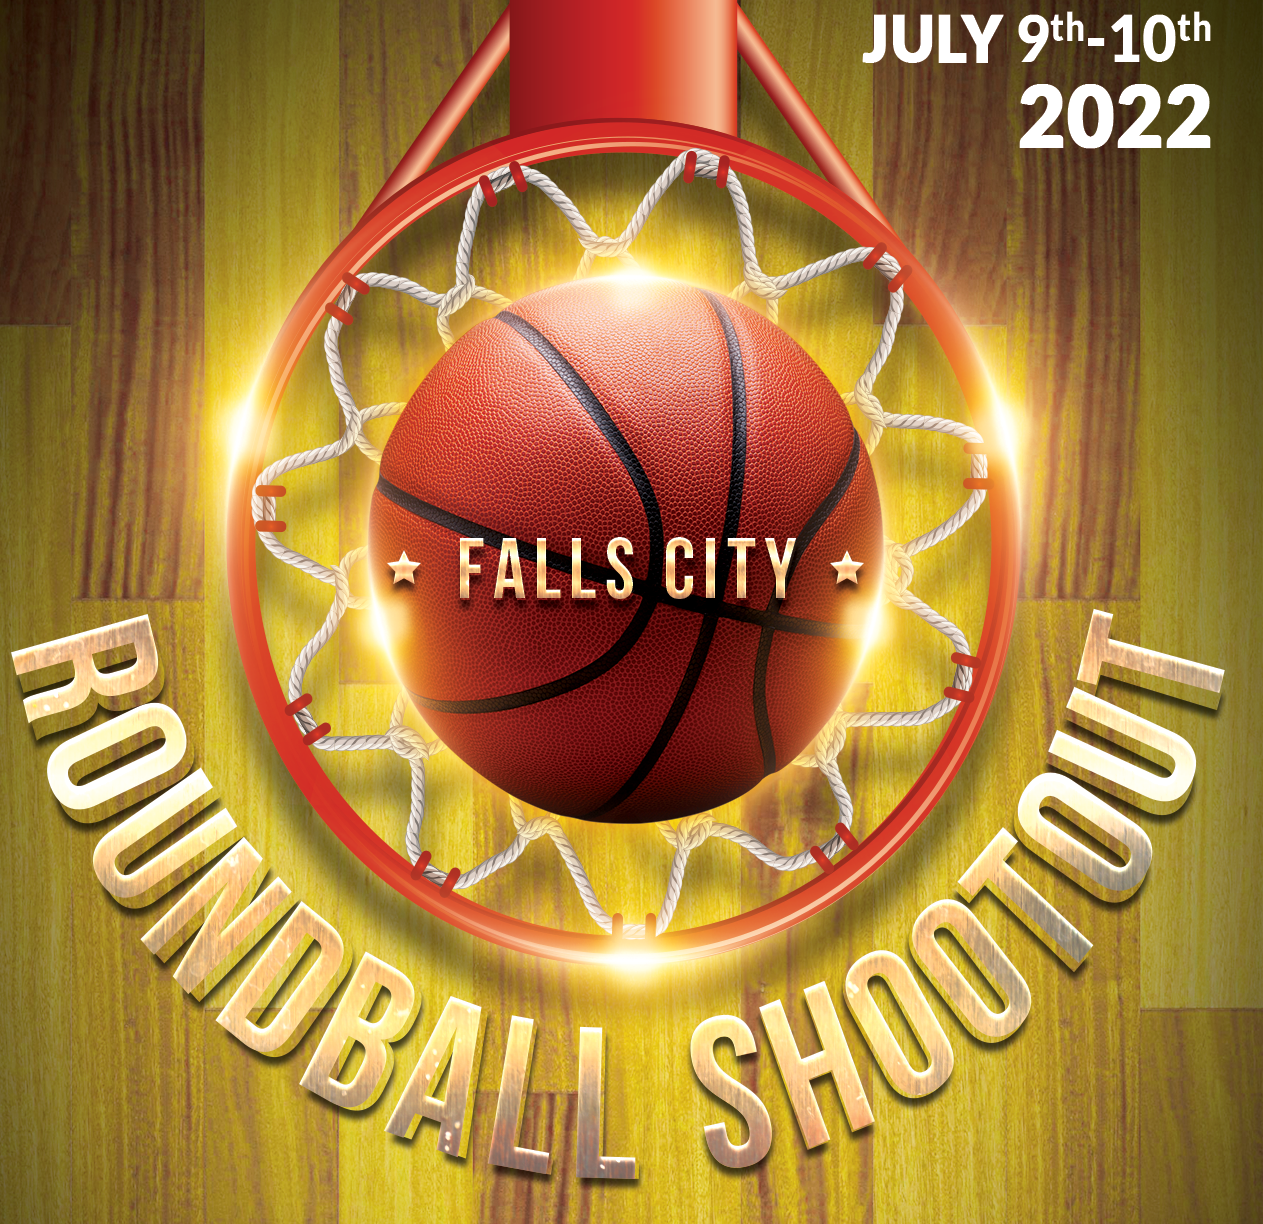 <strong><span style="font-size: 12pt;"><span style="color: #ff6600;">Falls City "Roundball Shootout"<br />July 9-10, 2022</span><br /><a href="http://www.midwestbballtournaments.com/ViewEvent.aspx?EID=958">Click Here for Info </a></span></strong>